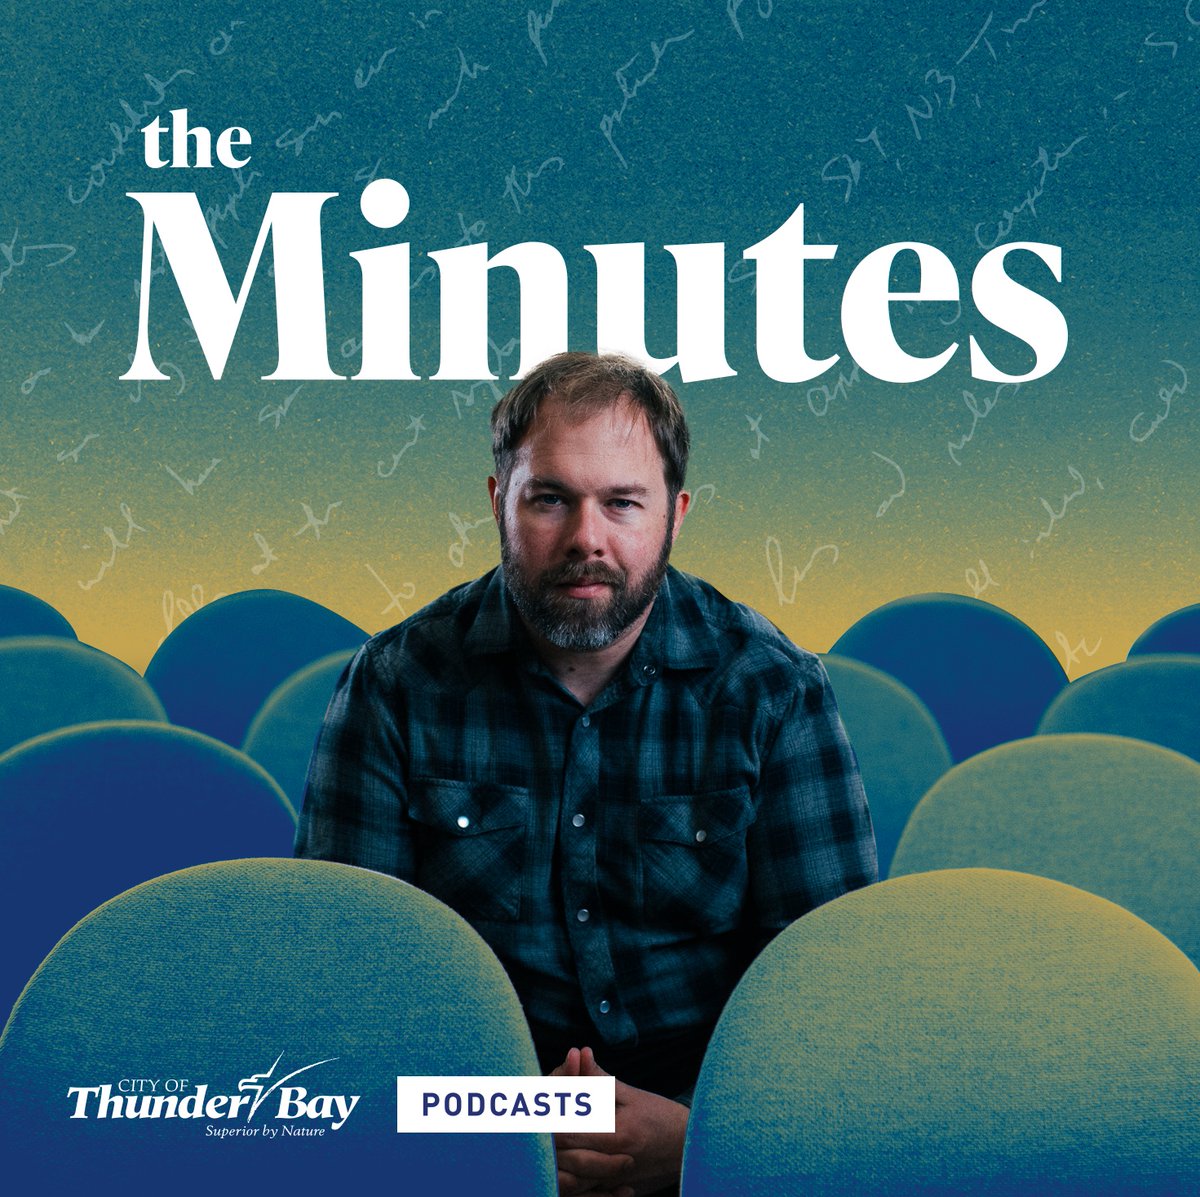 The latest episode of The Minutes is now online! Community Safety and Well-Being Specialist Lee-Ann Chevrette drops by, and host Jeff Walters has a rundown of what happened at council. this week. Find The Minutes at thunderbay.ca/theminutes or wherever you get your podcasts.